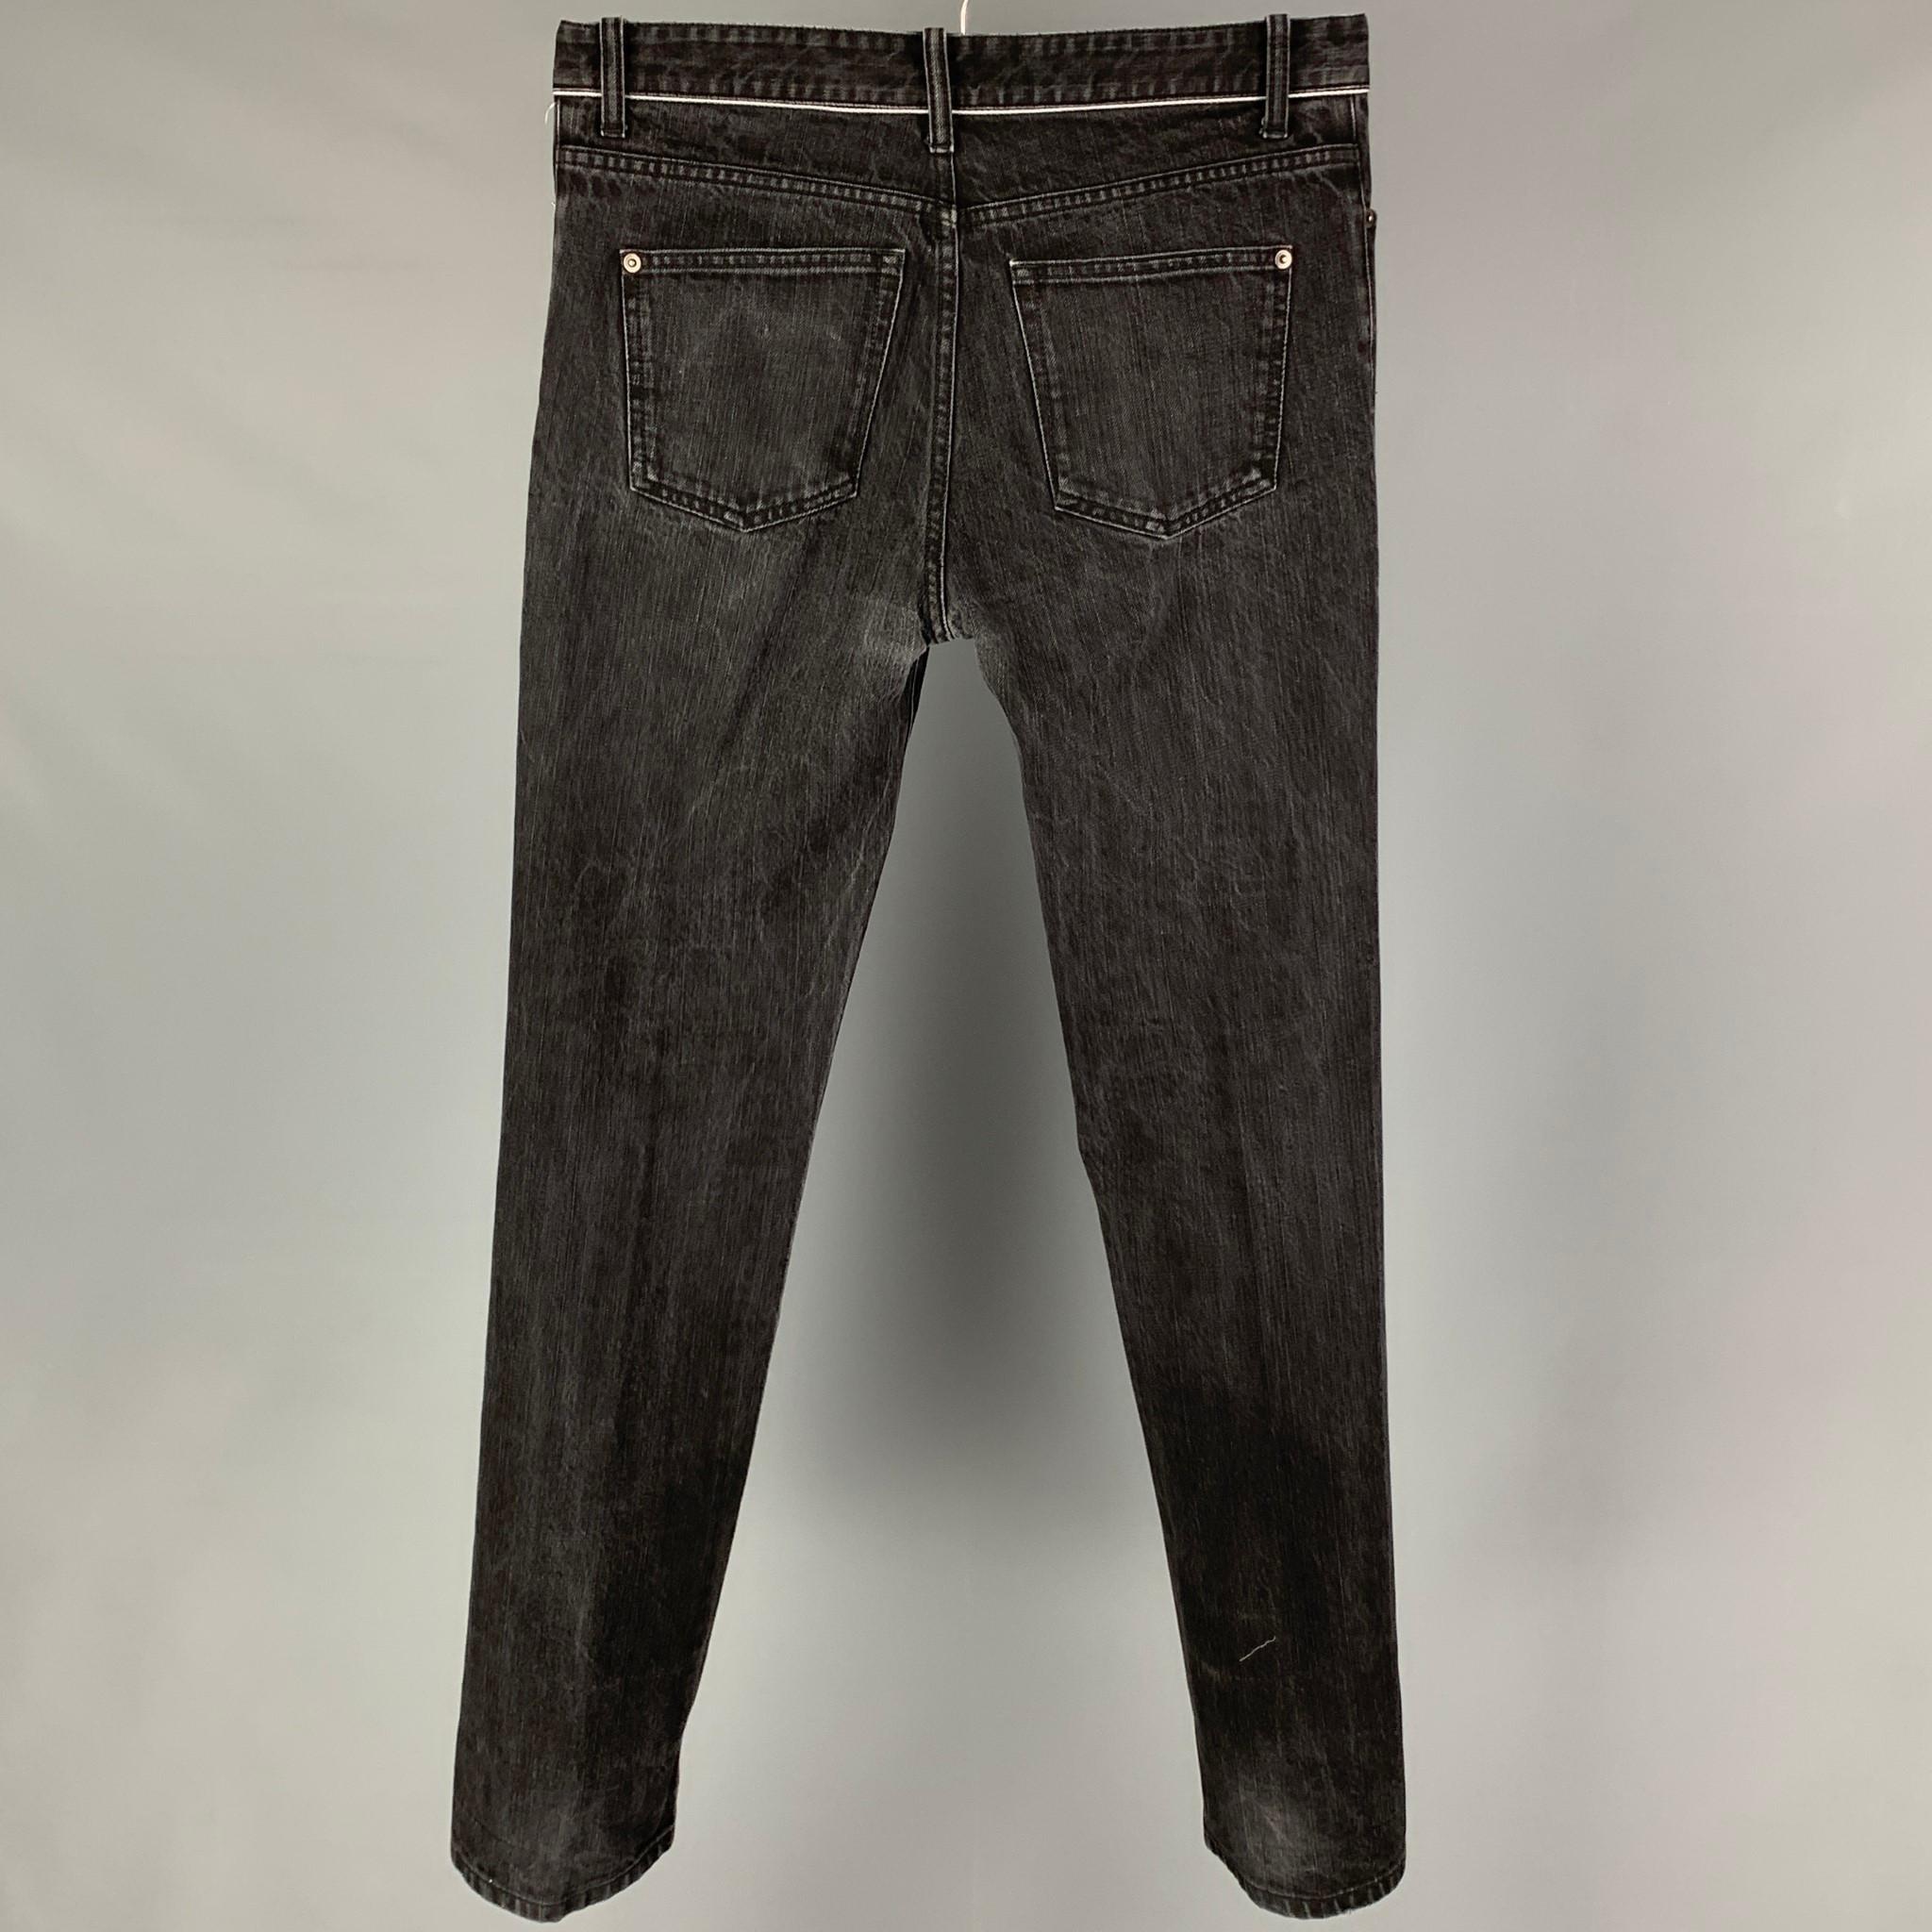 BALENCIAGA jeans comes in a black washed denim featuring a slim fit, white trim, and a button fly closure. Made in Italy. 

Very Good Pre-Owned Condition.
Marked: 33

Measurements:

Waist: 34 in.
Rise: 11 in.
Inseam: 35 in.